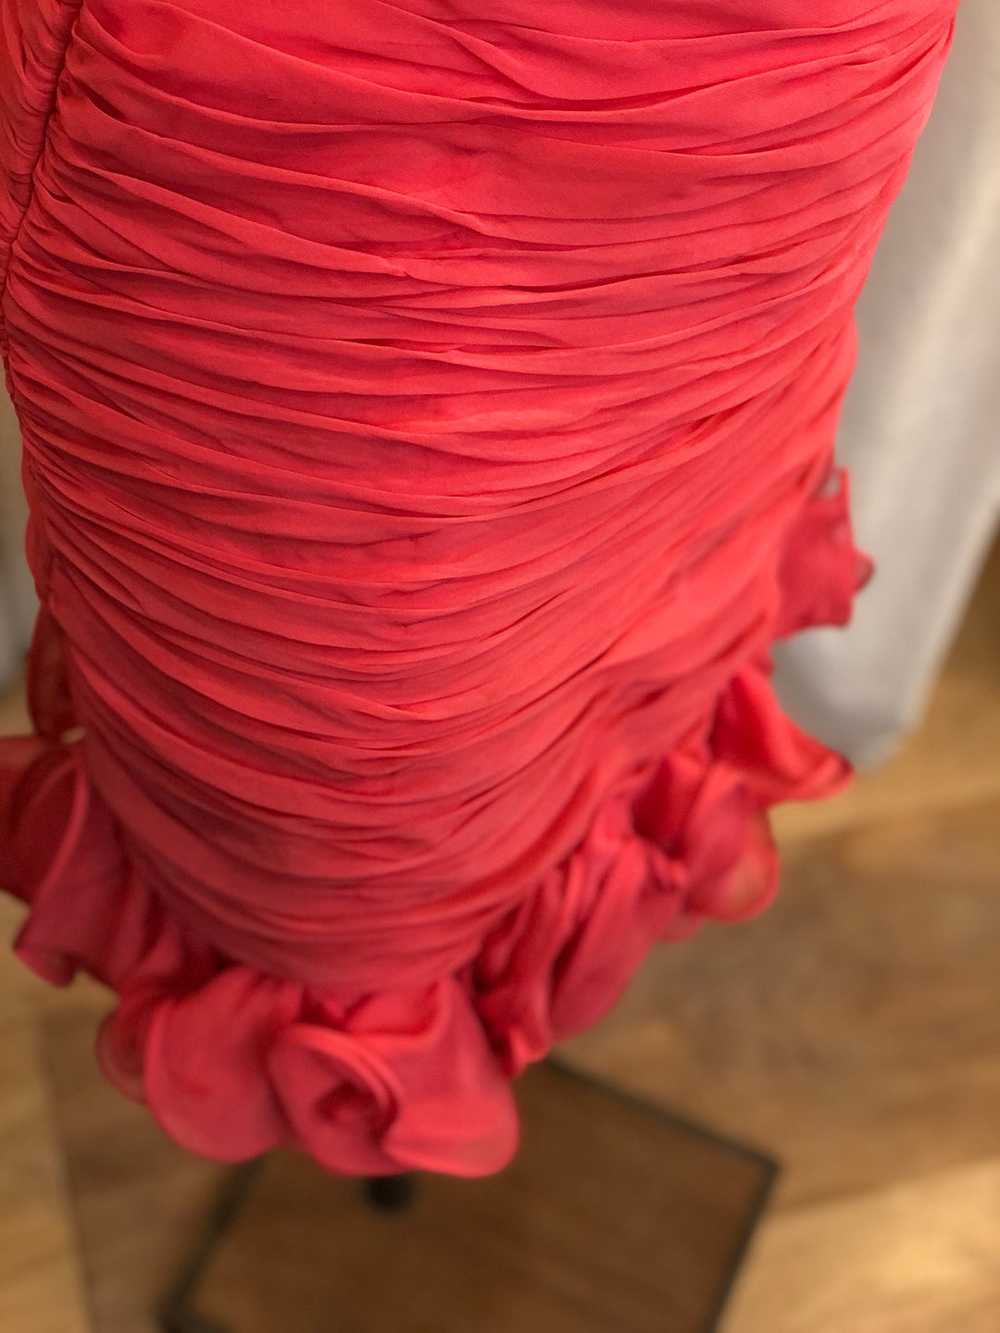 1980's Lillie Rubin Ruched Coral Dress - image 2